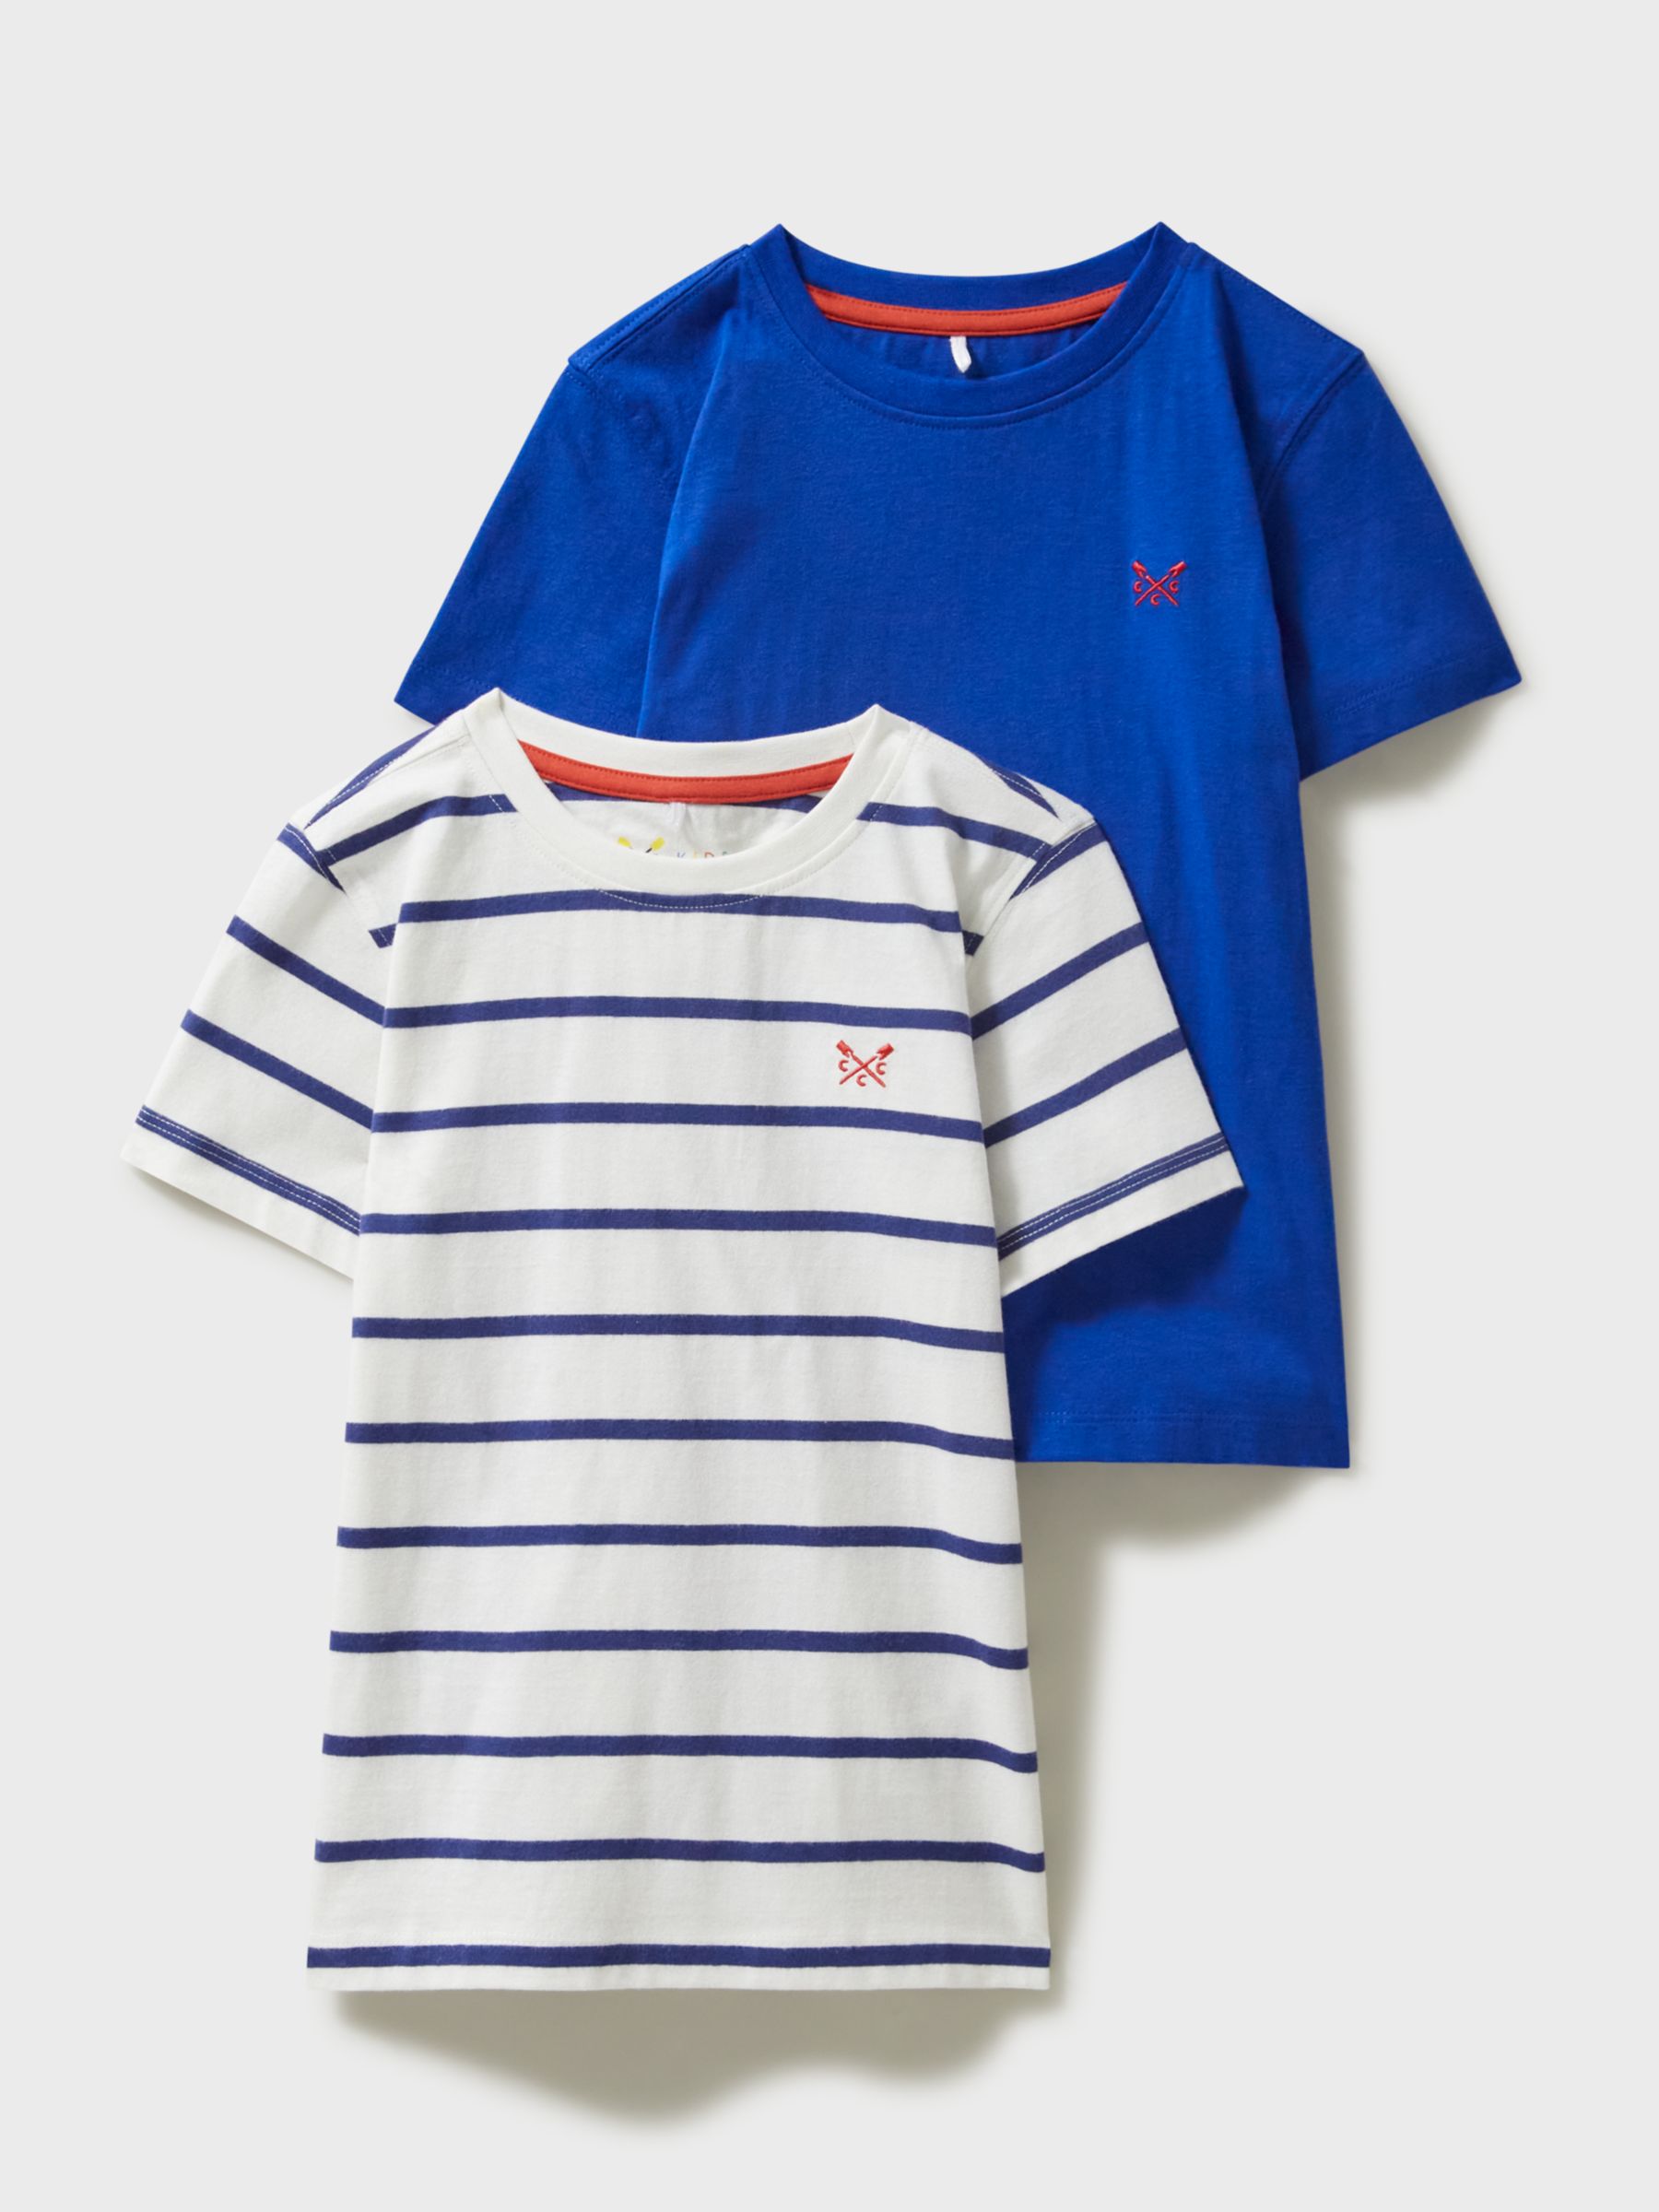 Buy Crew Clothing Kids' Cotton T-Shirt, Pack of 2, Blue/Multi Online at johnlewis.com